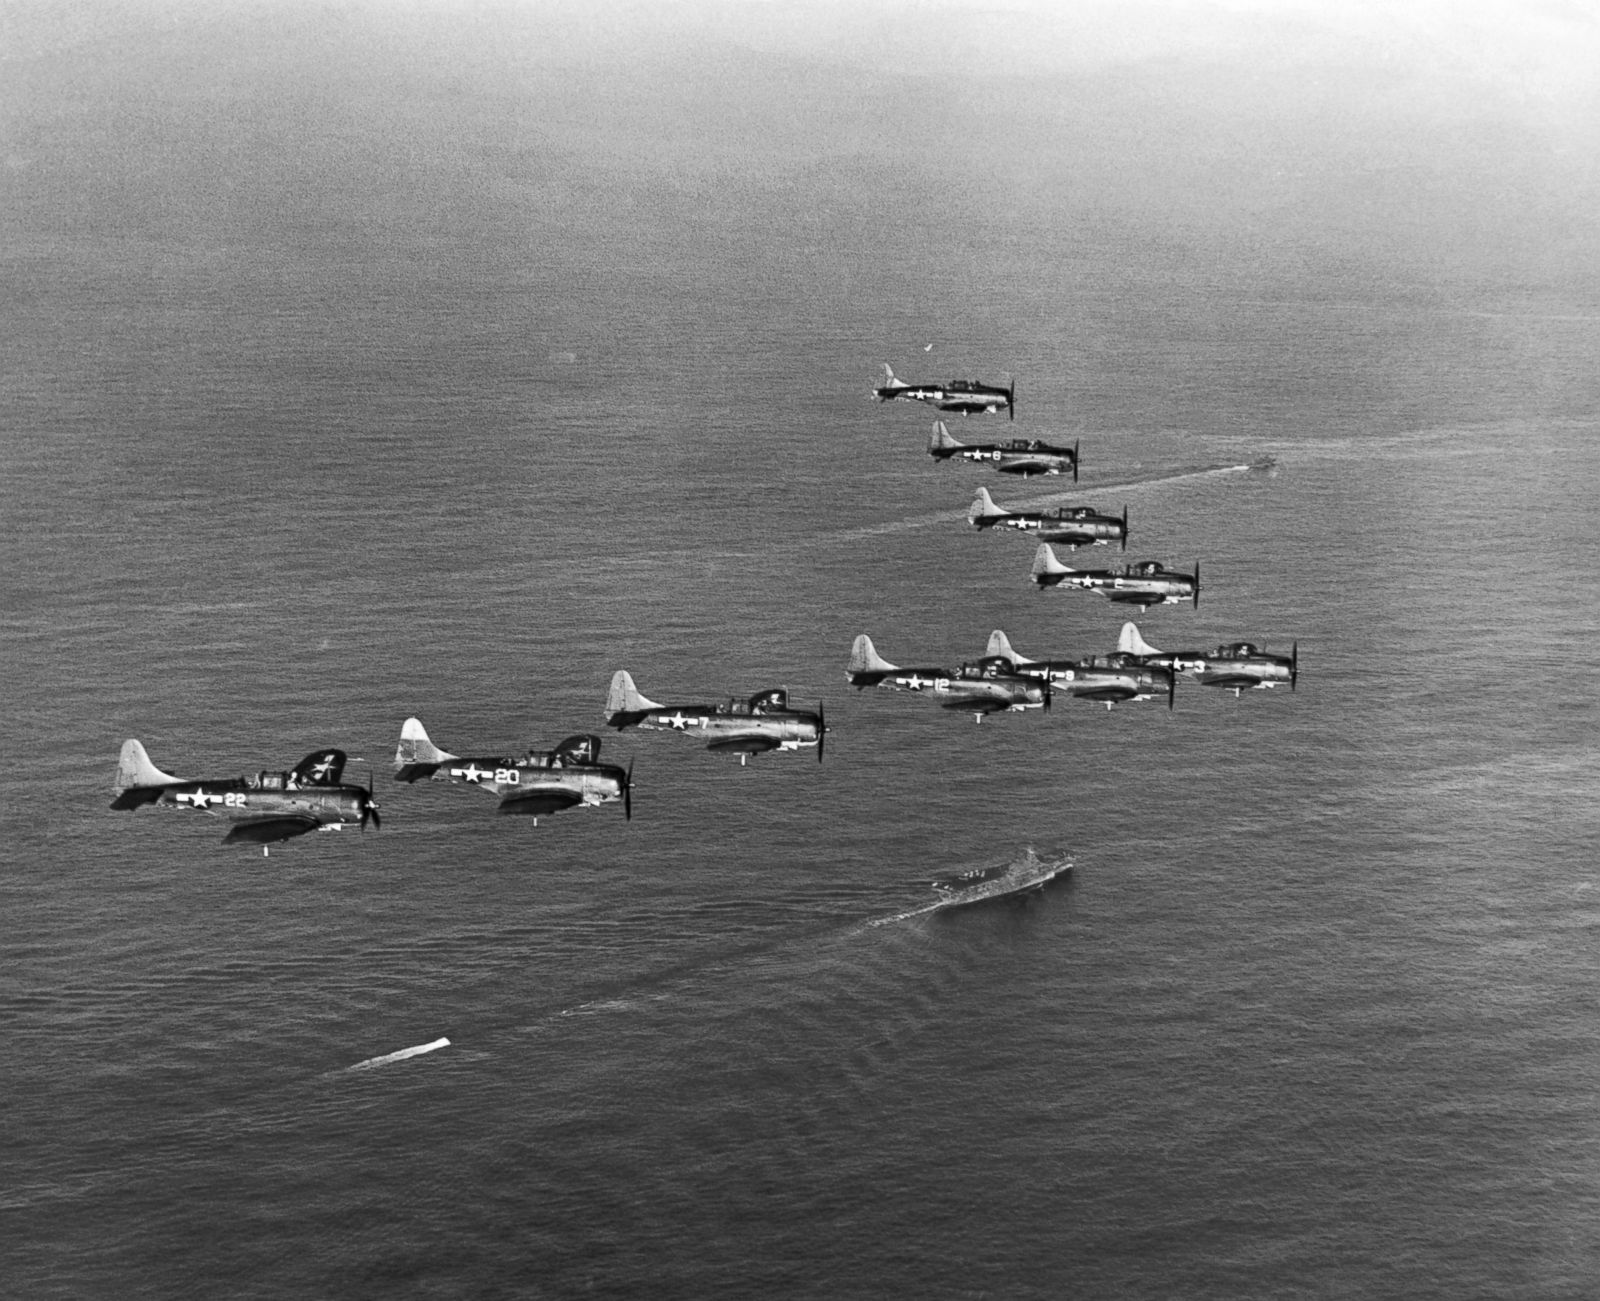 75th anniversary of the Battle of Midway Photos | Image #91 - ABC News